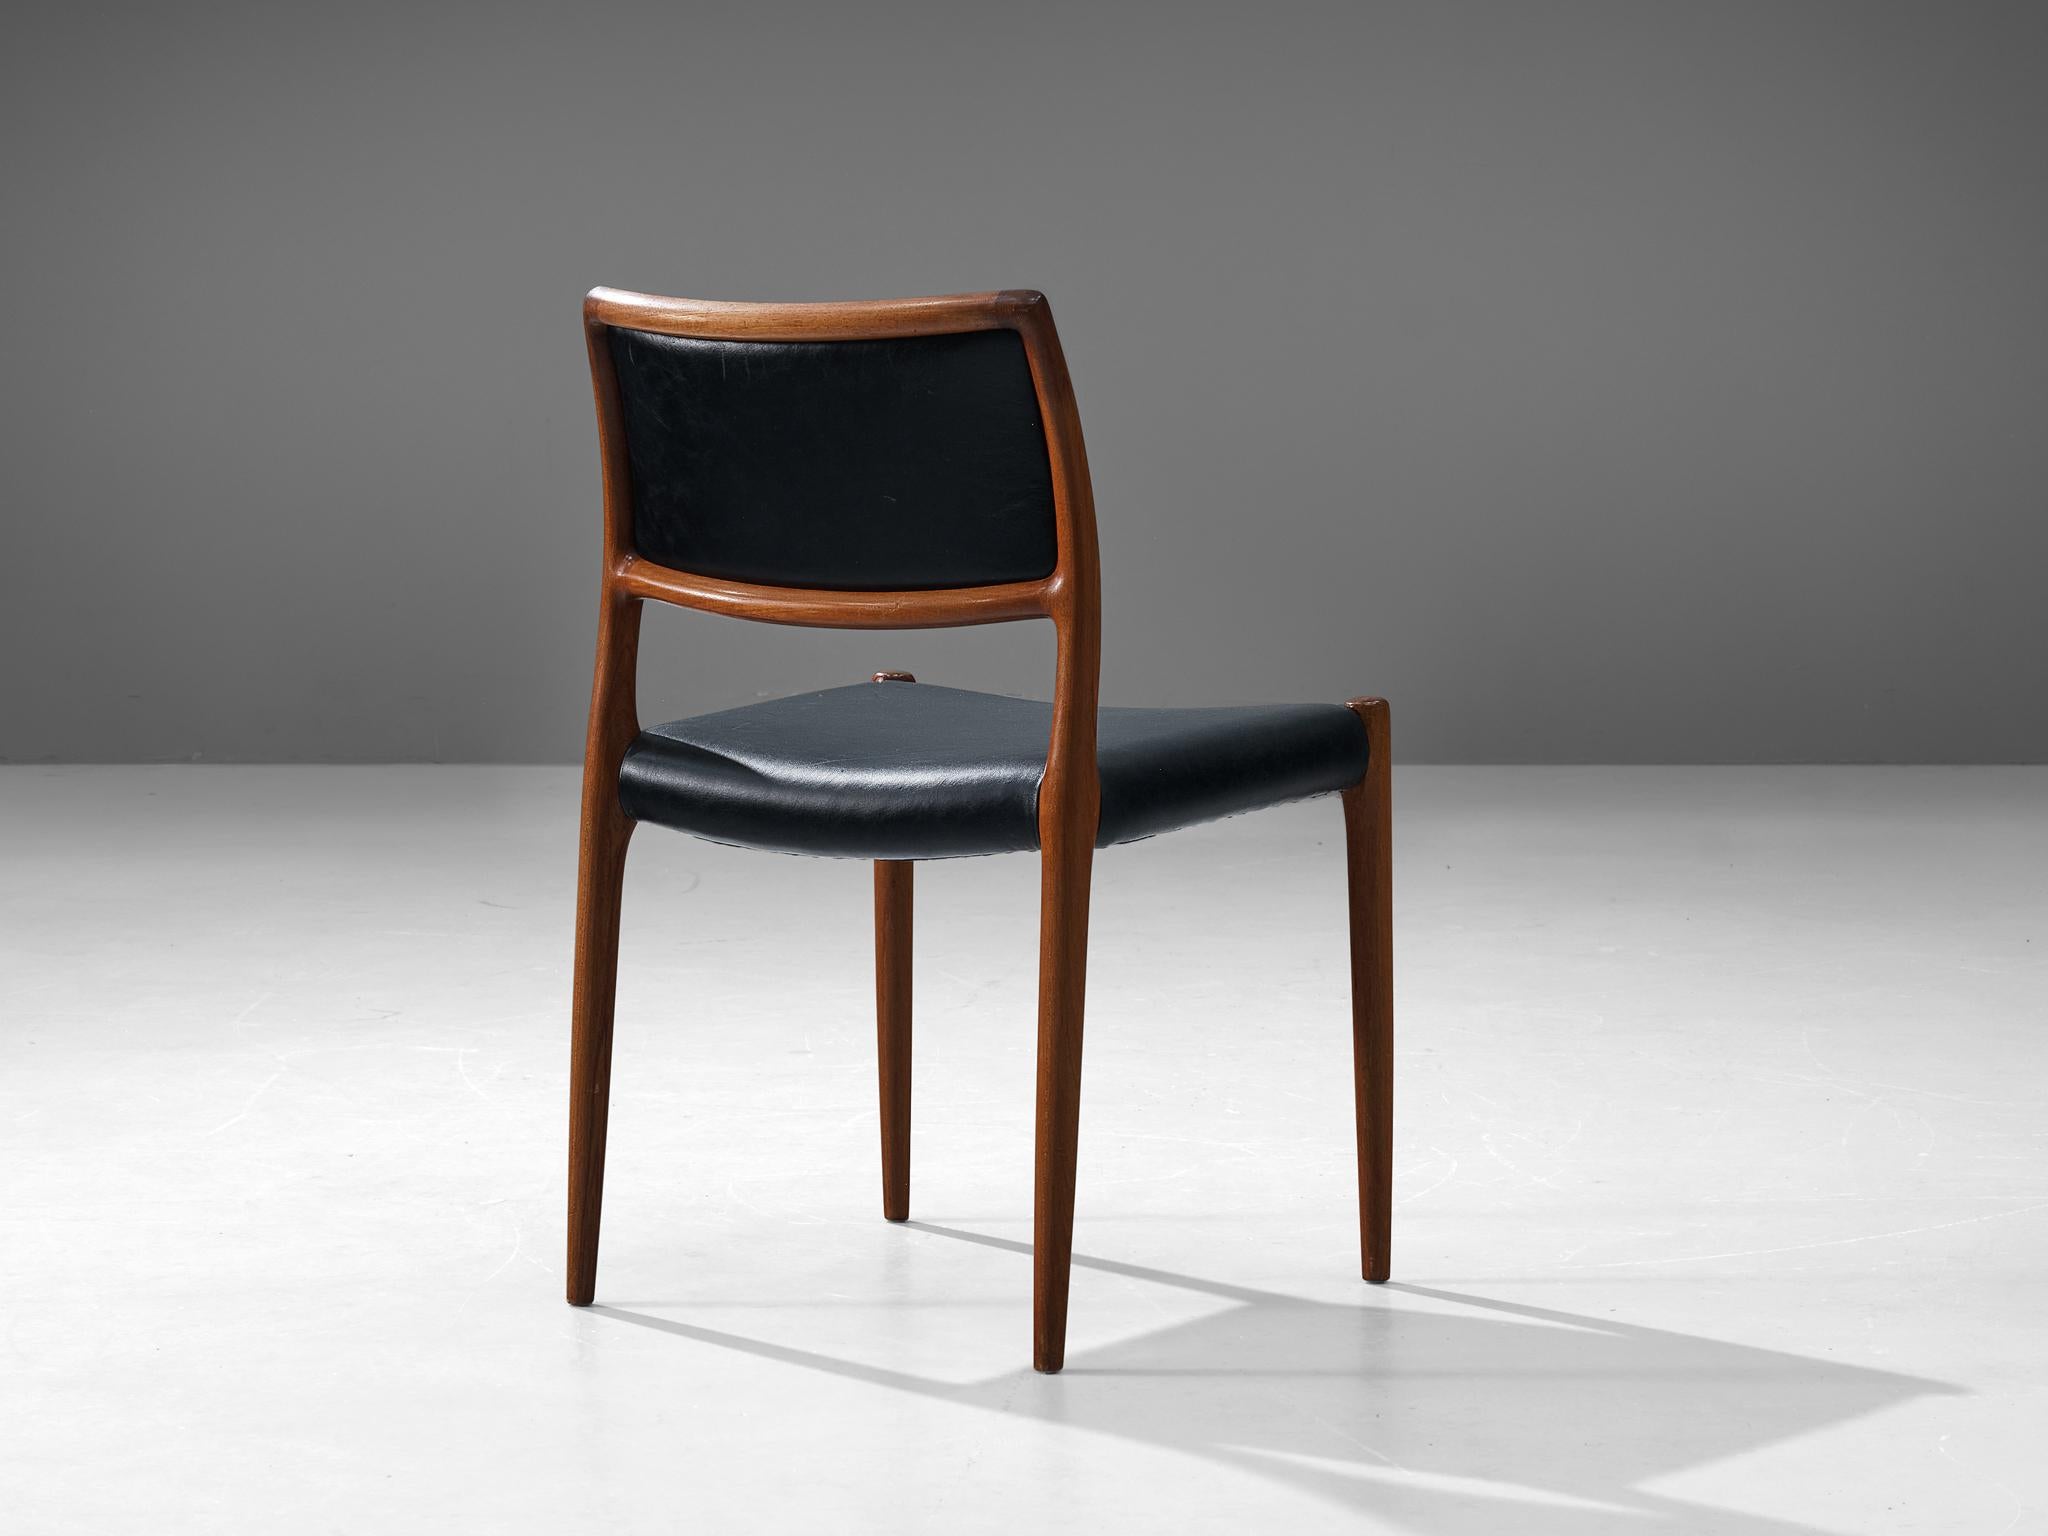 Niels Otto Møller for J. L. Møllers, dining chair, in teak and leather, Denmark, 1960s.

Refined and elegant chair designed by Niels Otto Møller in the 1960s. The elegant designed open shape of the frame in combination with upholstery makes this